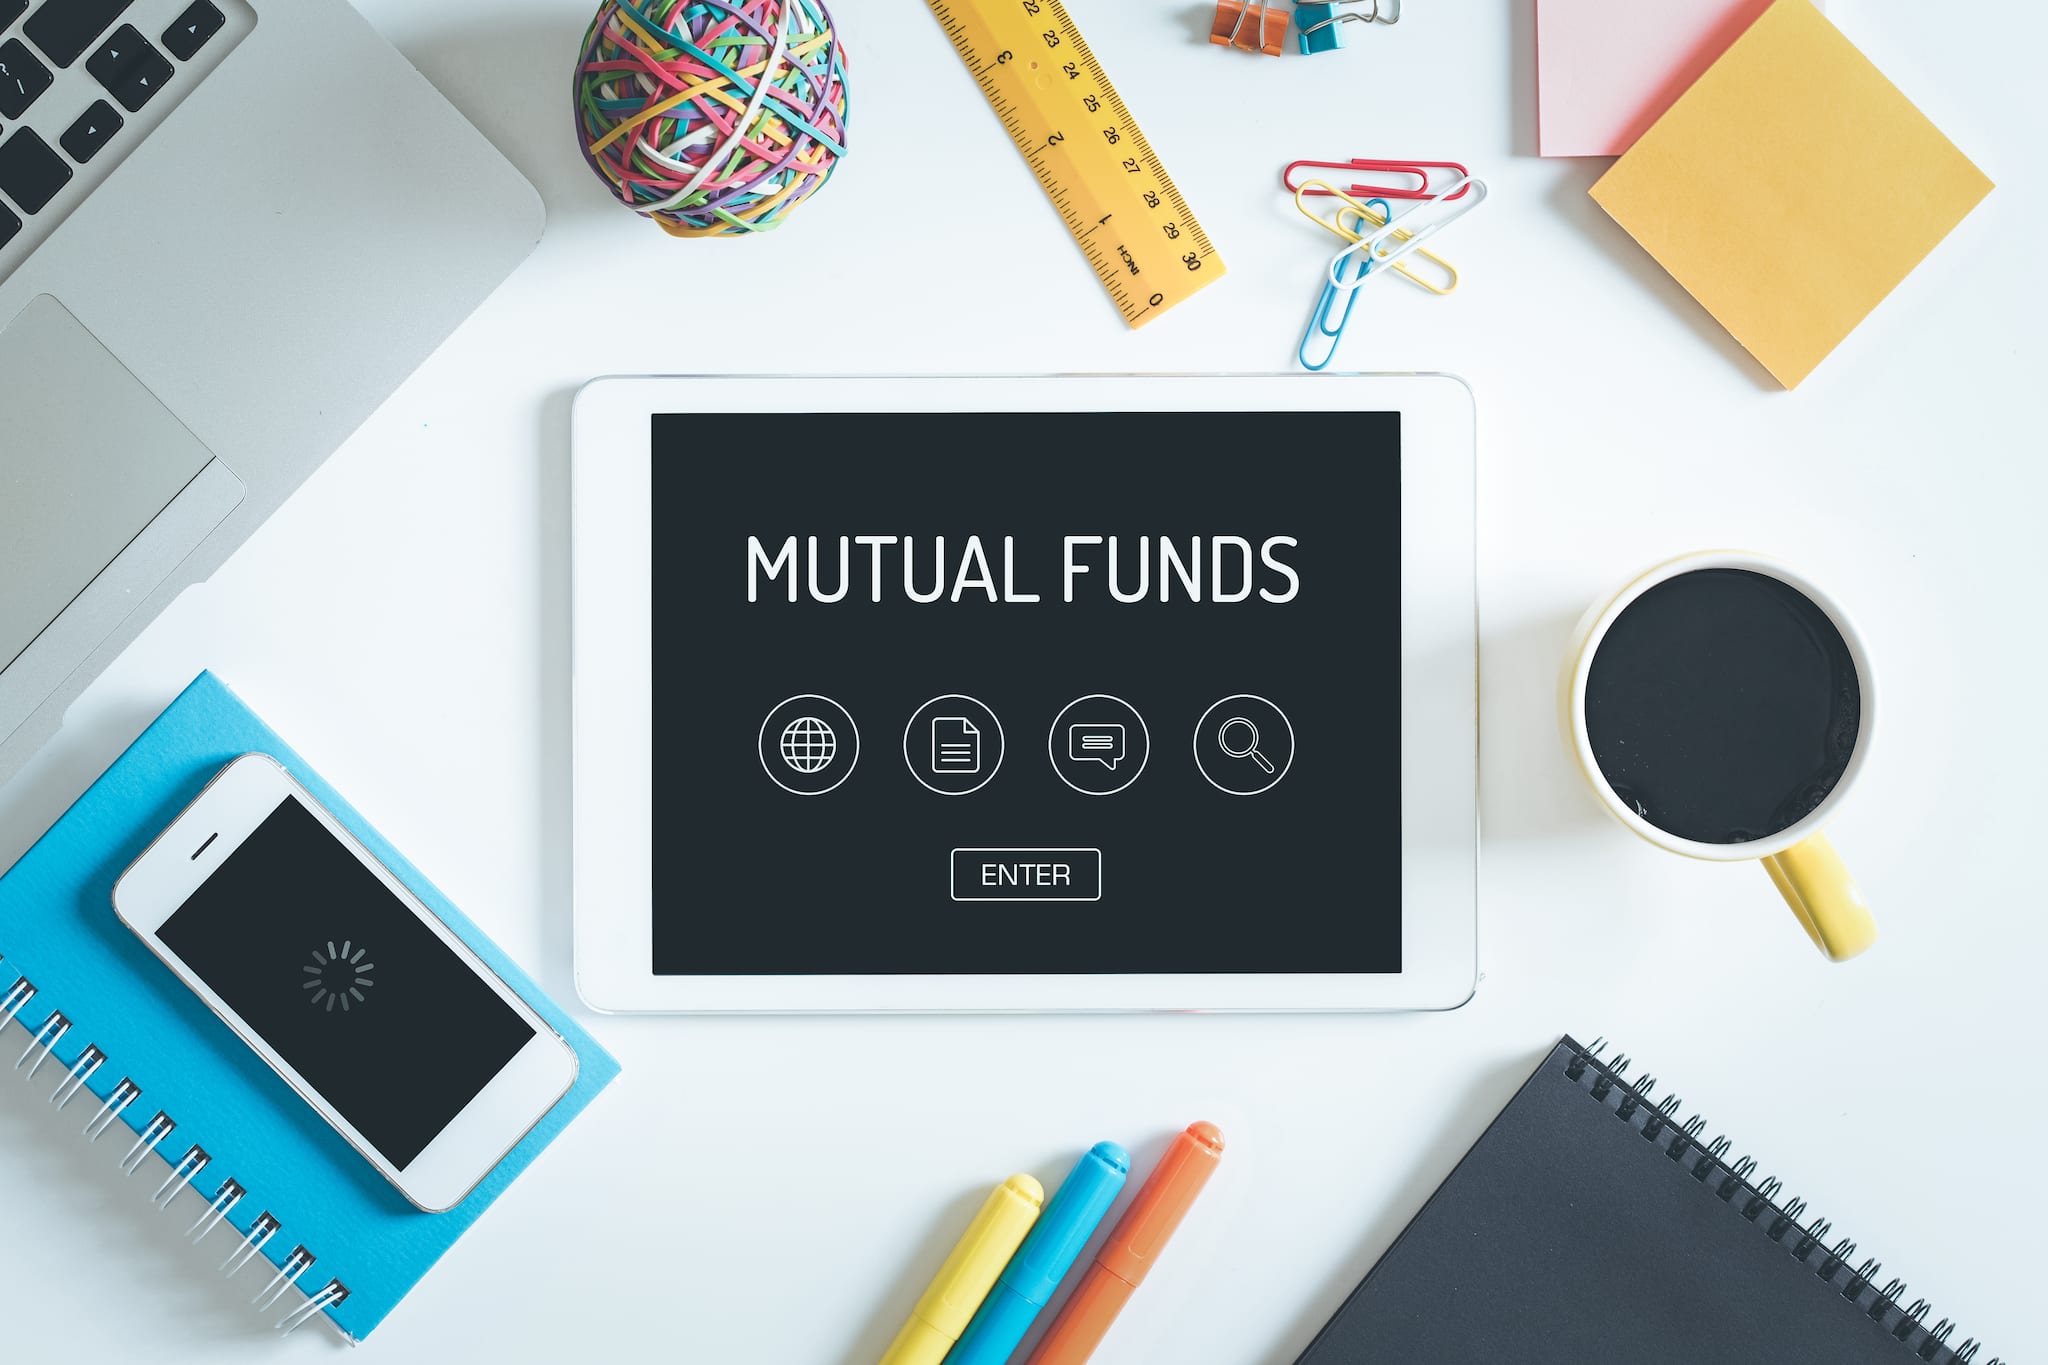 Explained: Why re-opening of international mutual funds may benefit only a few investors